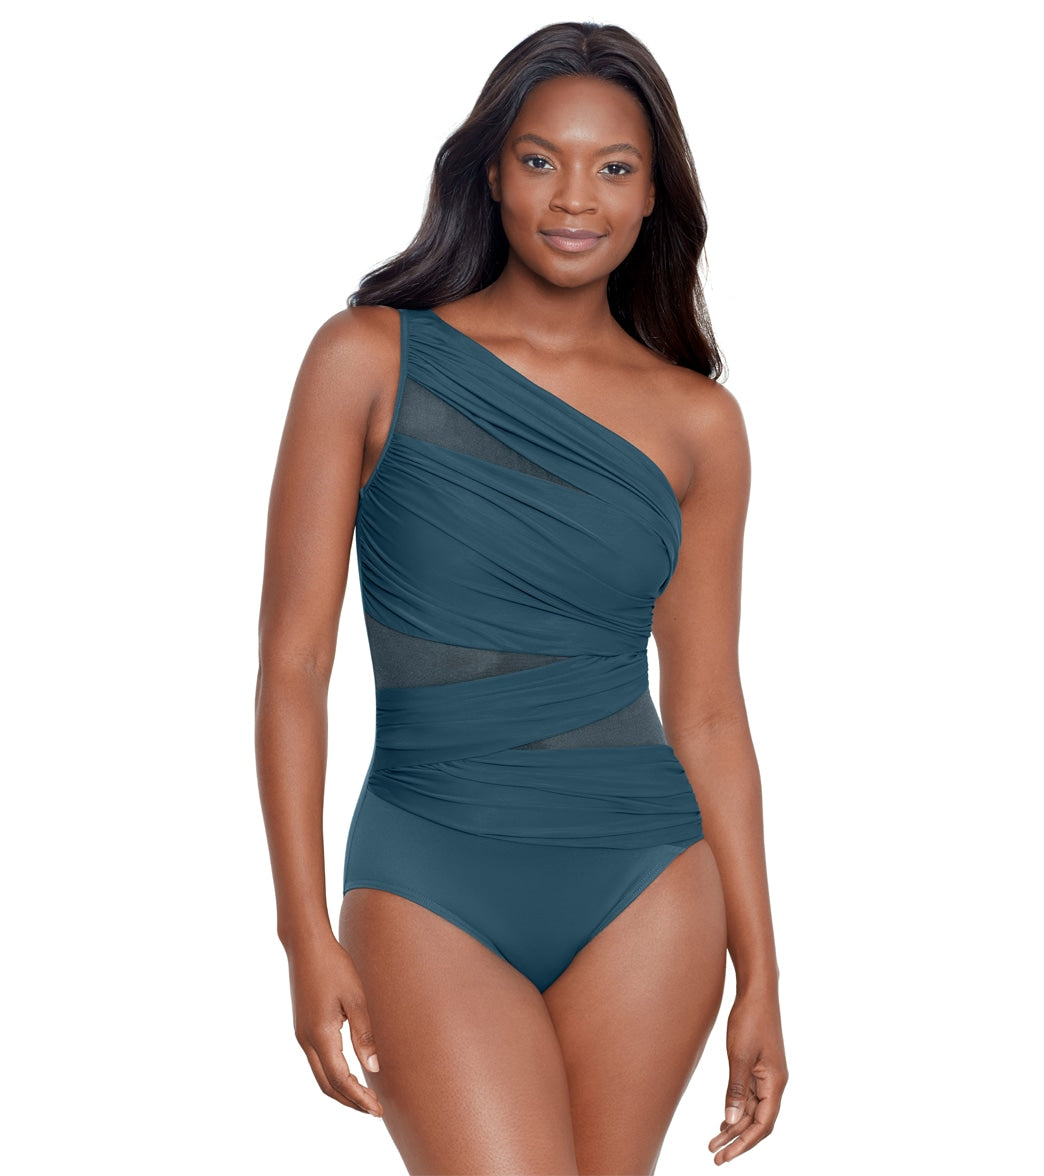 Miraclesuit Women's Network Mystique One Piece Swimsuit at